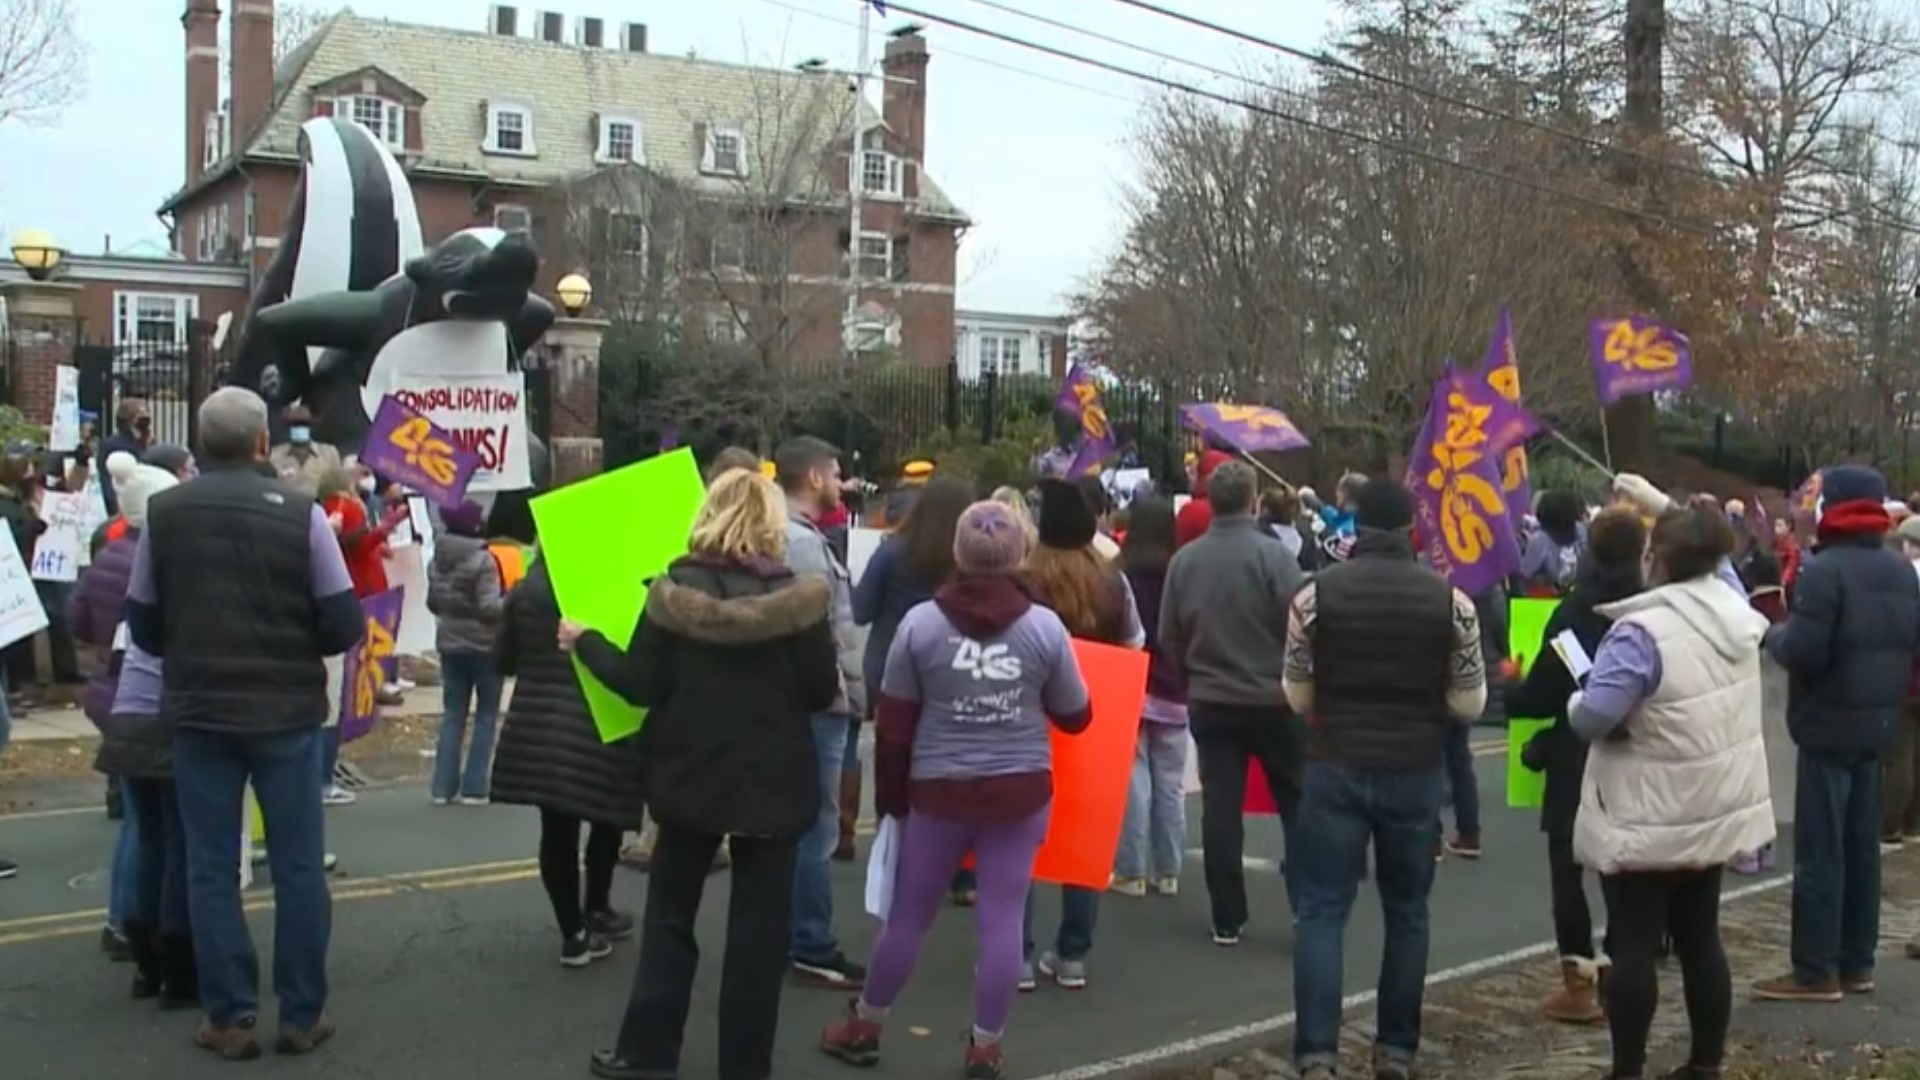 Students, faculty, and staff from CT's 12 community colleges are pushing back against the proposal to consolidate the schools into one institution with 12 branches.